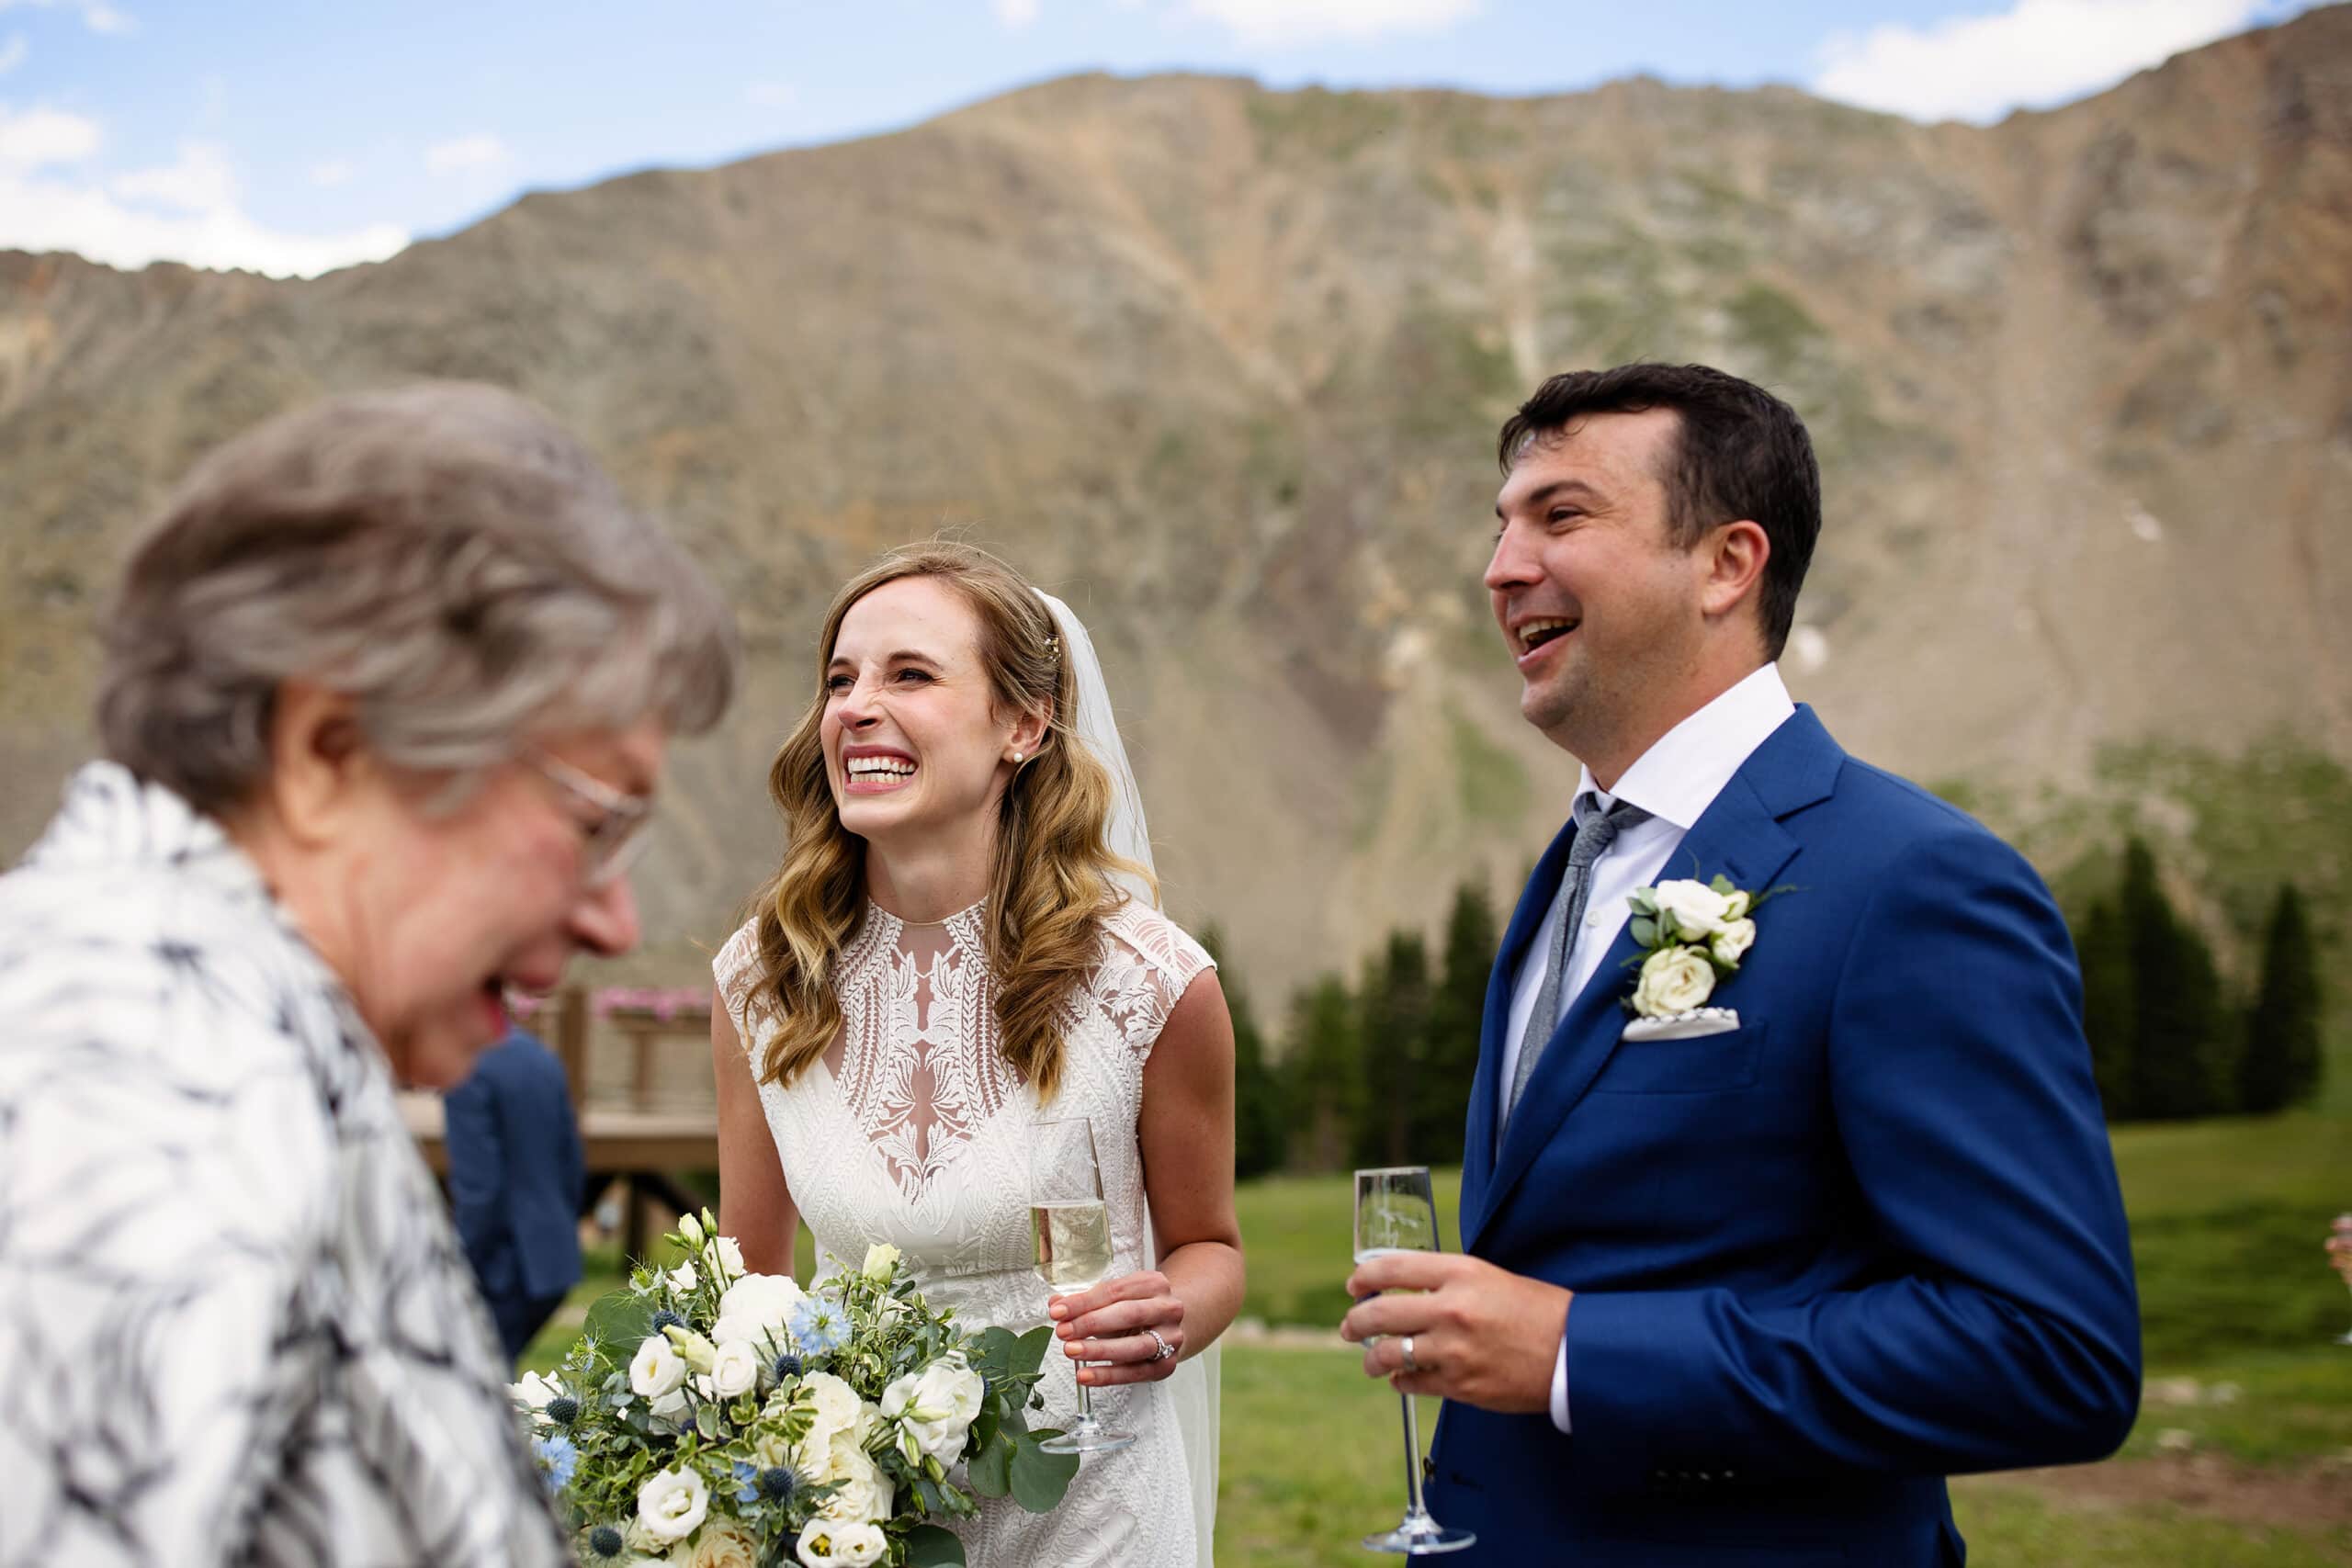 The bride and groom share a laugh with her grandmother